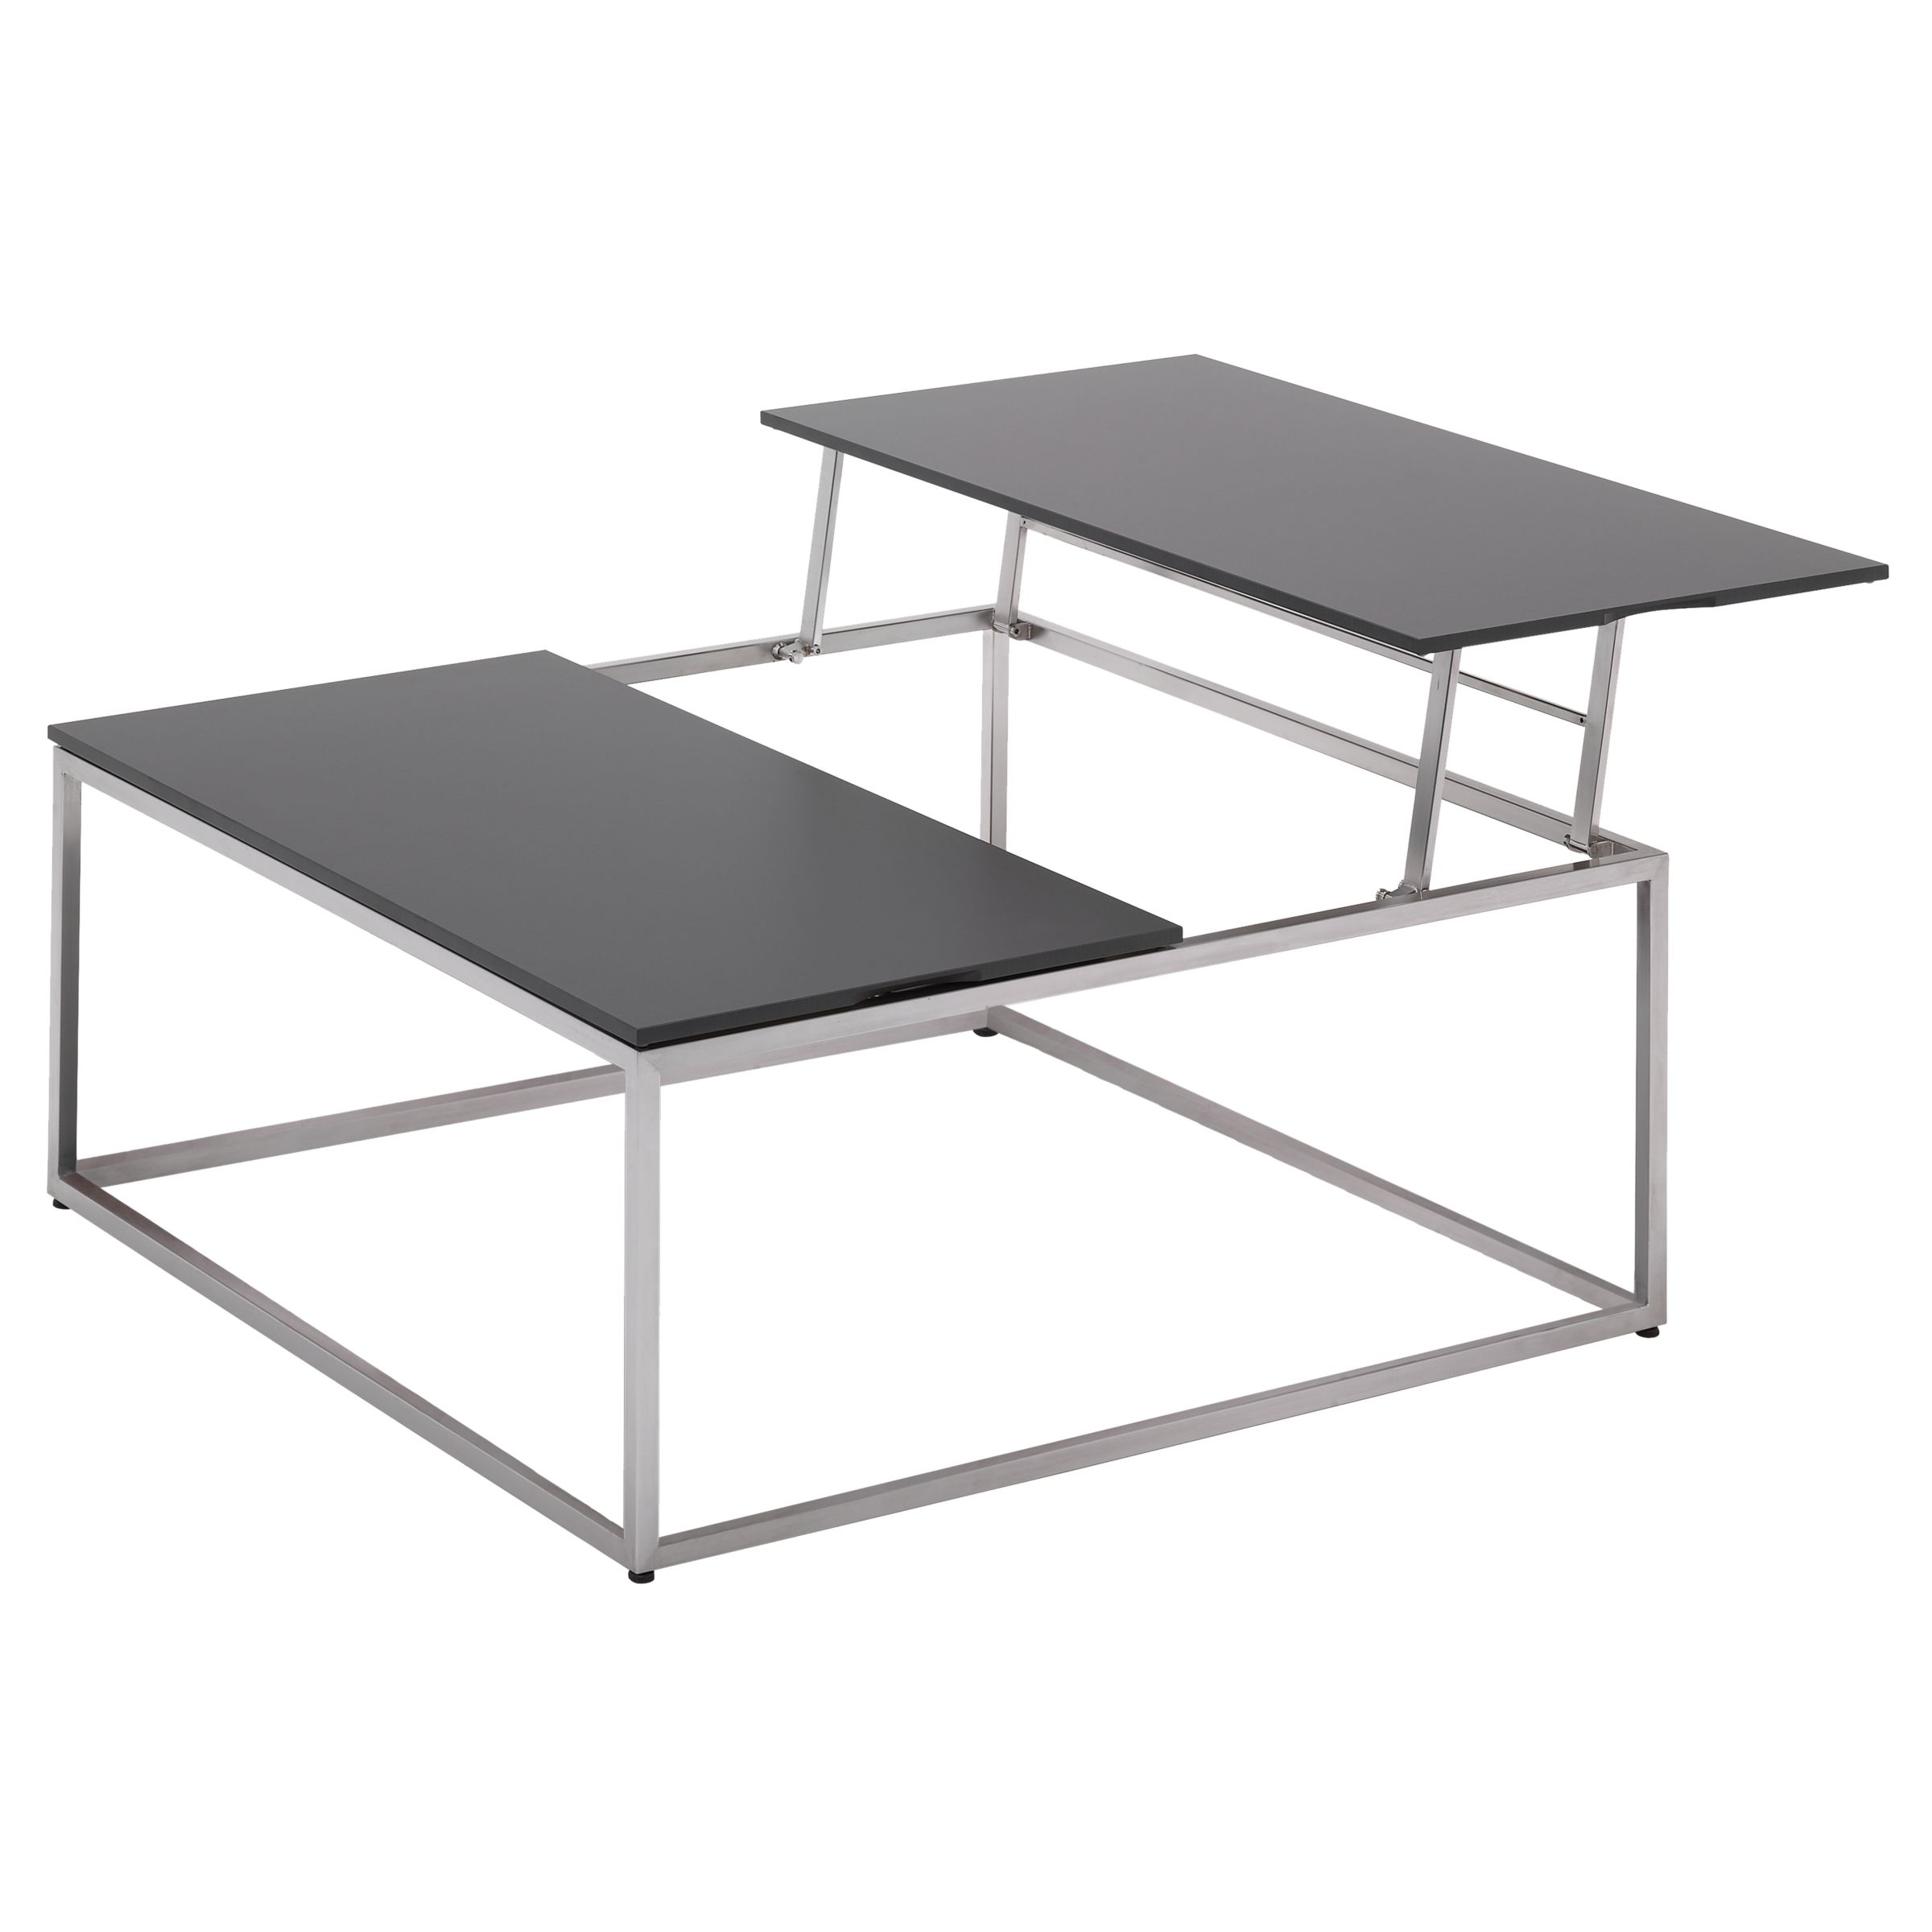 Cloud Dual Height Outdoor Coffee Table,